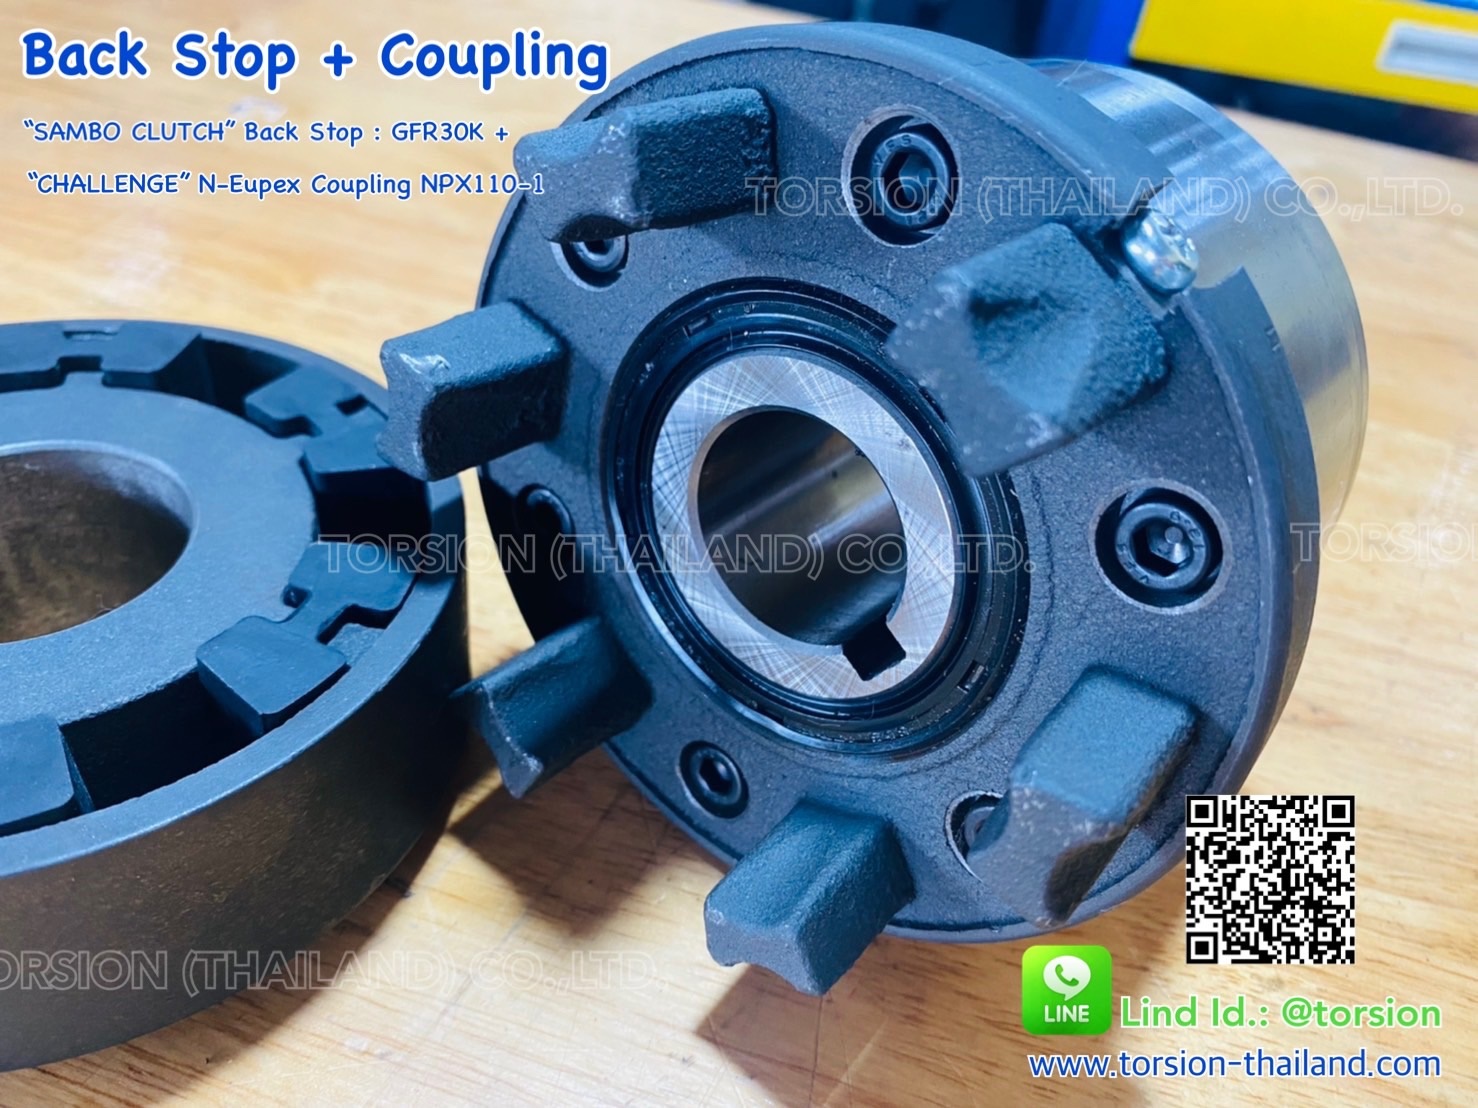 Back Stop with Coupling